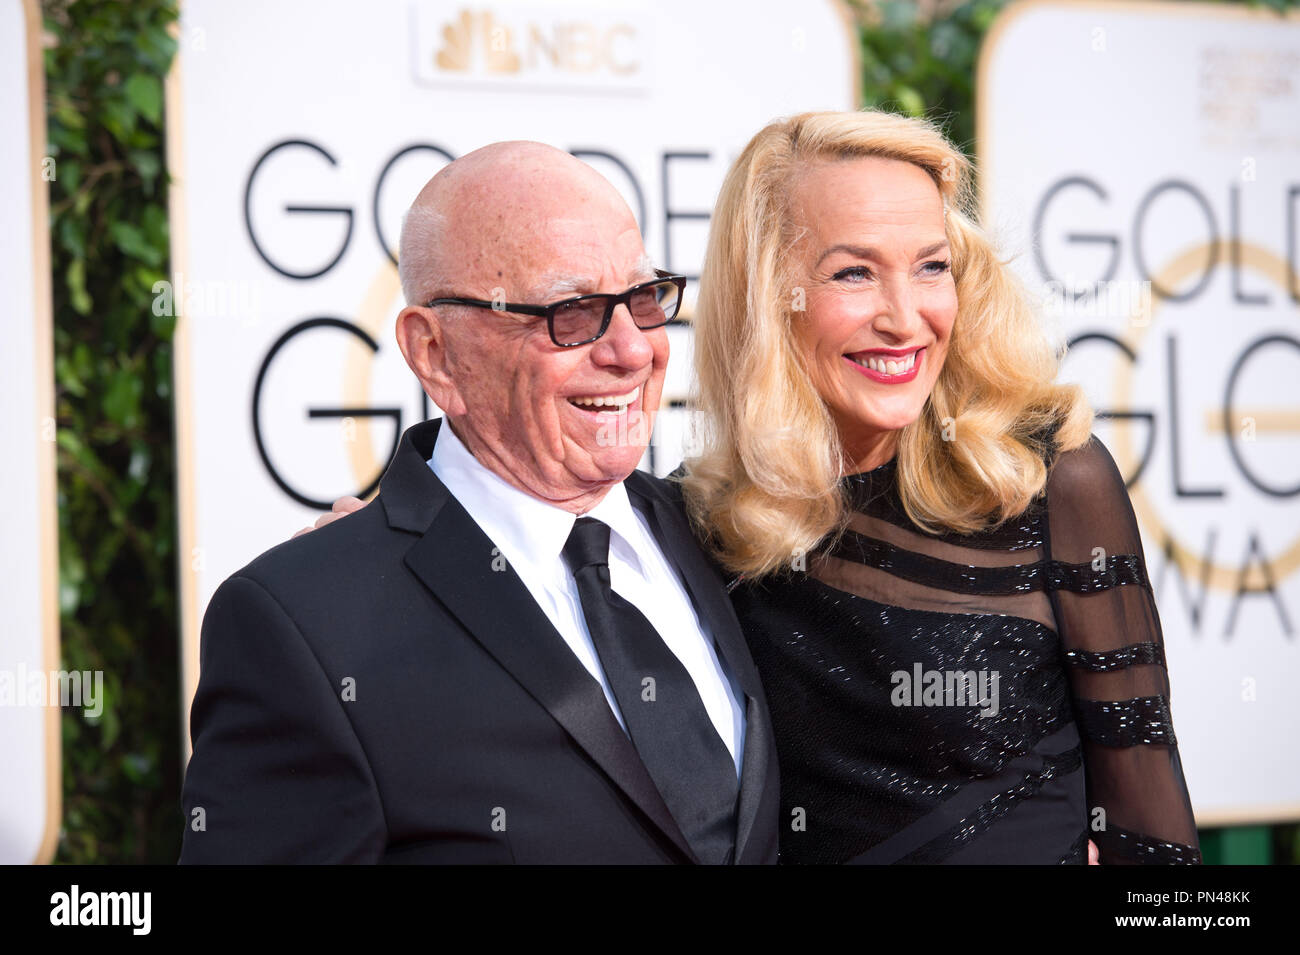 Rupert Murdoch and Jerry Hall, model, arrive at the 73rd Annual Golden Globe Awards at the Beverly Hilton in Beverly Hills, CA on Sunday, January 10, 2016. Stock Photo